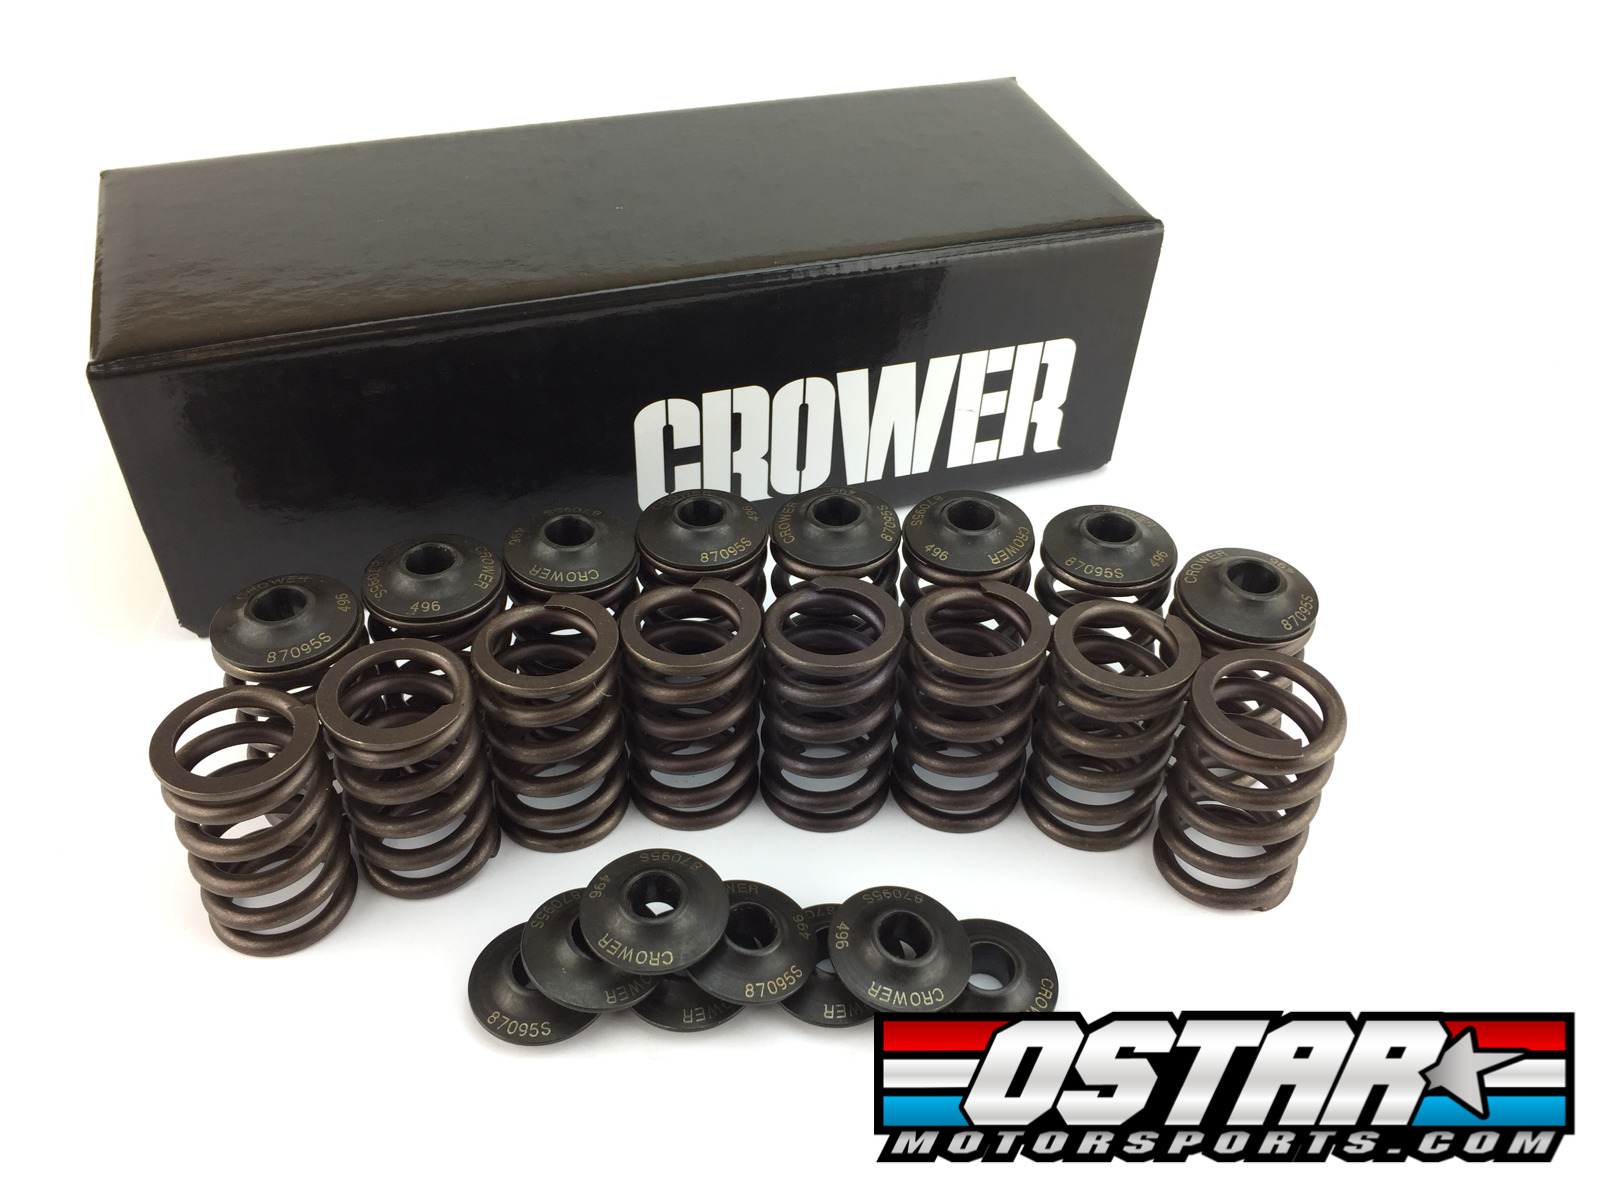 Crower Springs & Retainers for 90 - 98 Talon 90 - 99 Eclipse Evo 8 9 4G63 Turbo